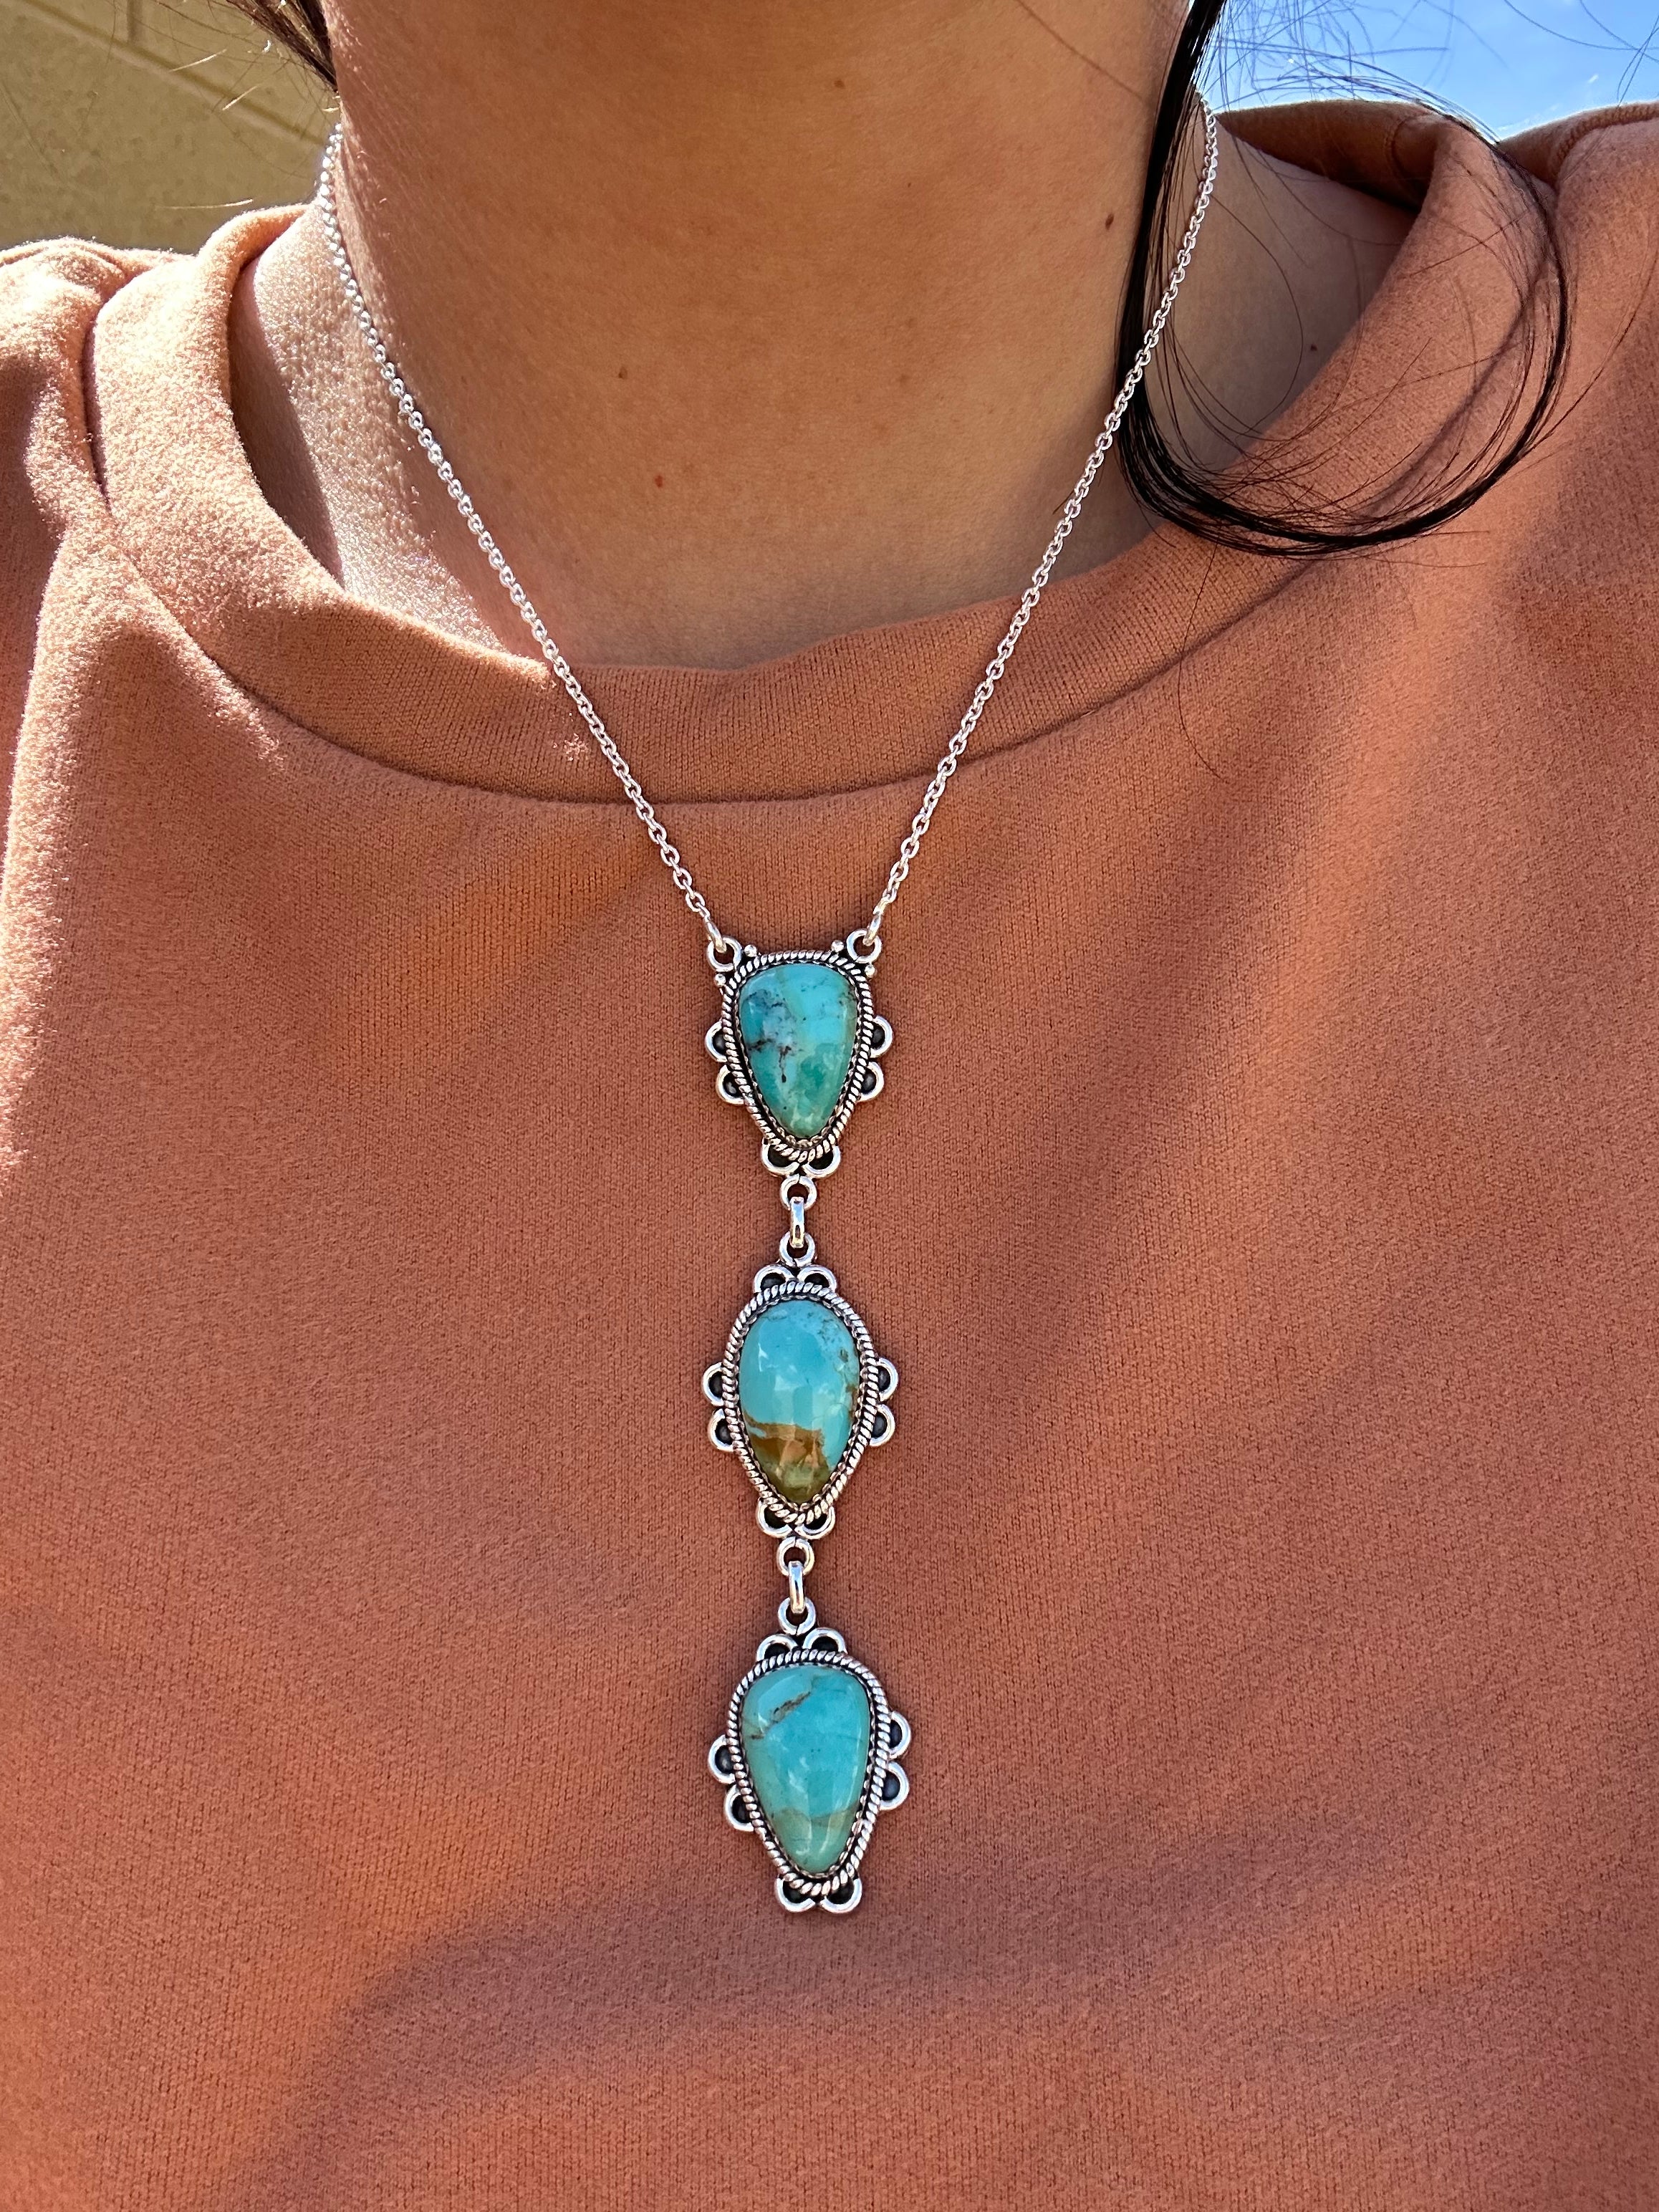 Southwest Handmade Kingman Turquoise & Sterling Silver Necklace